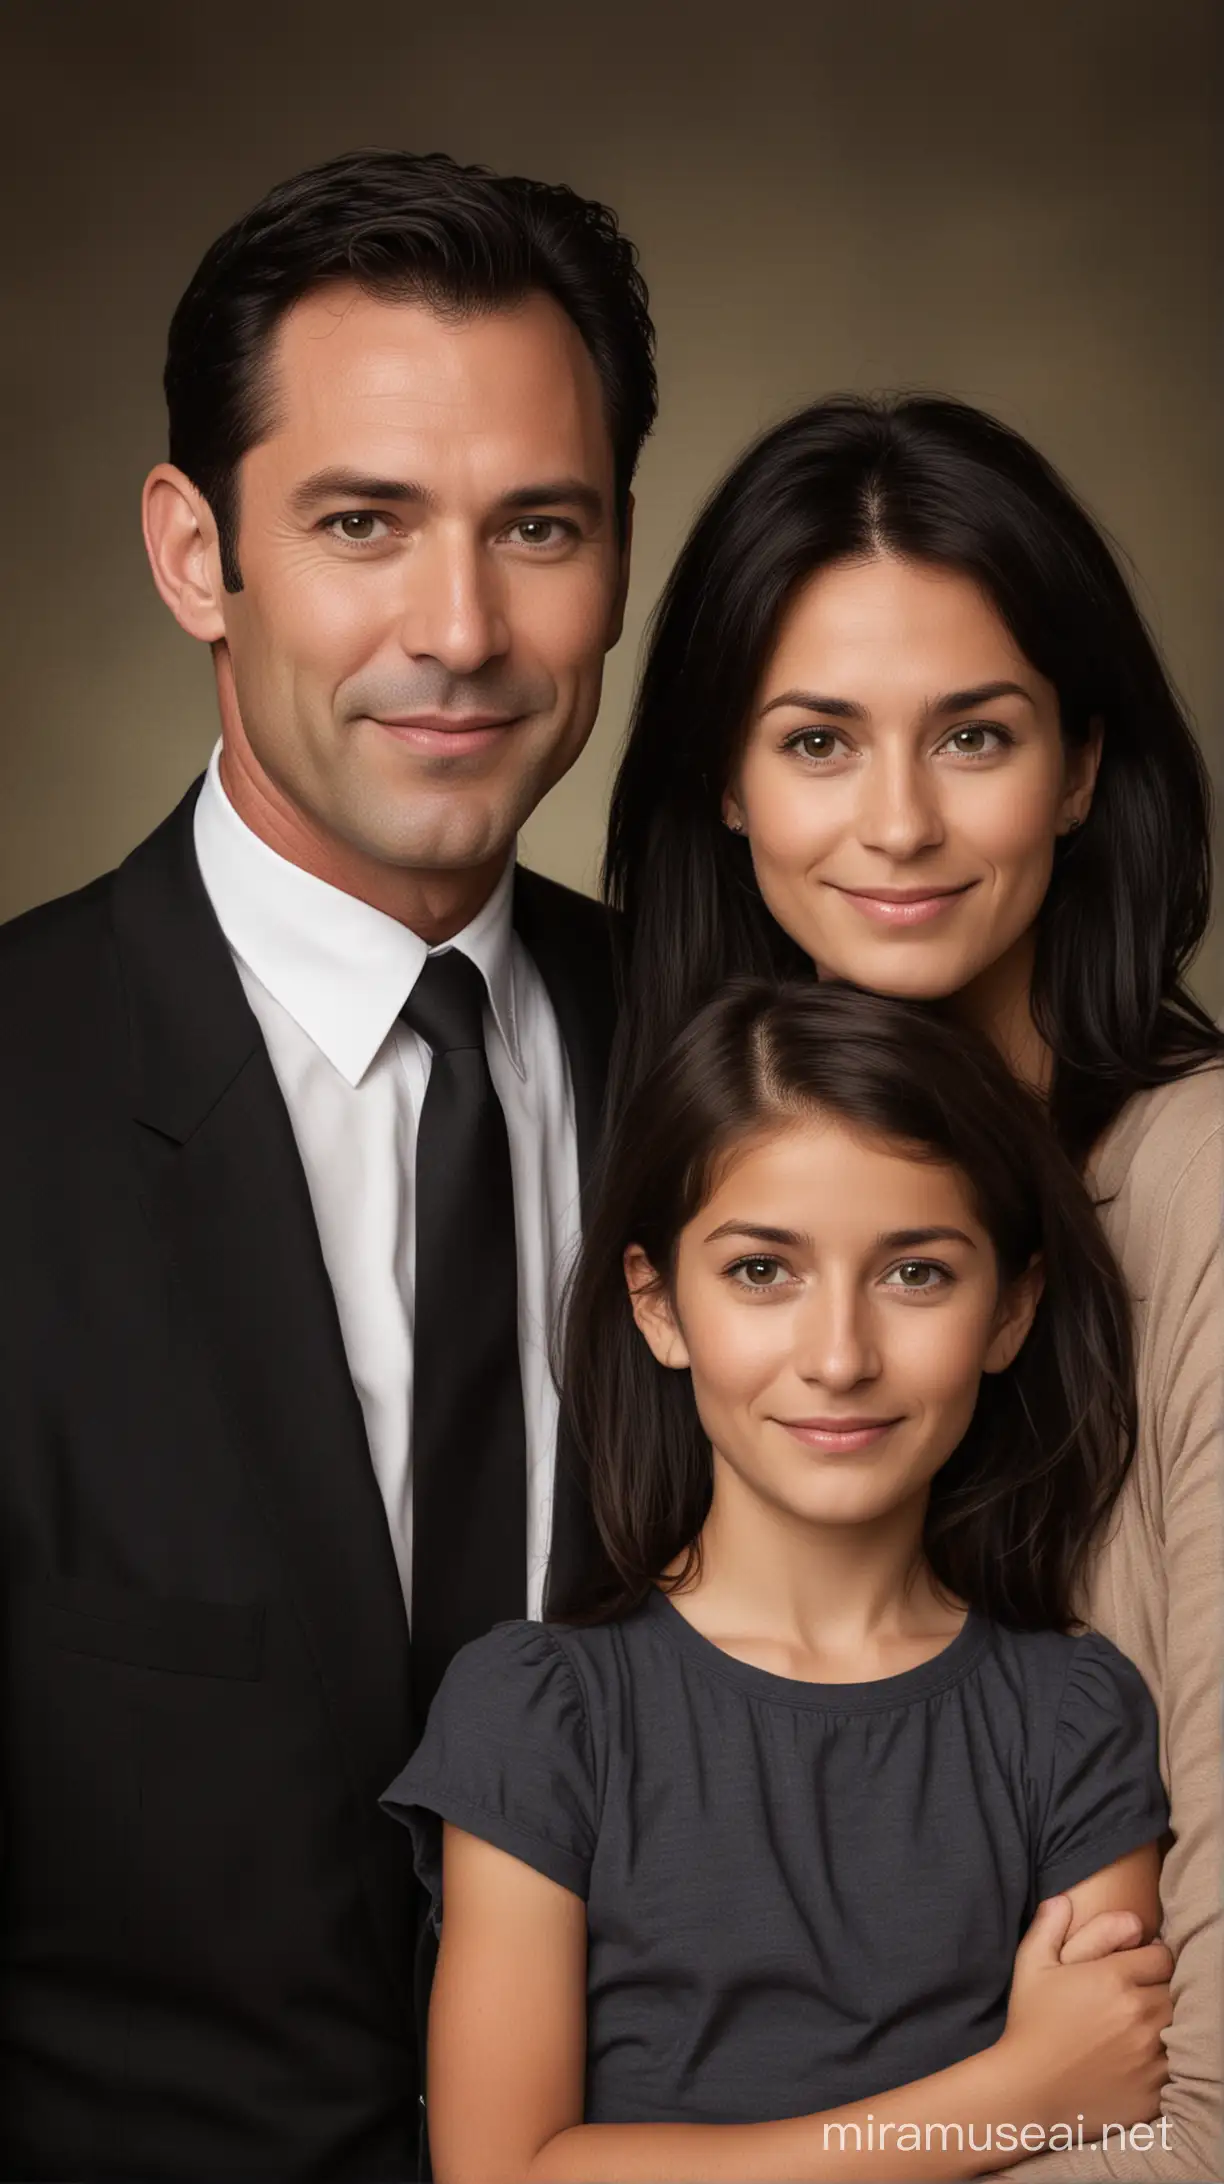 DarkHaired Family Portrait Father Mother Daughter and Son